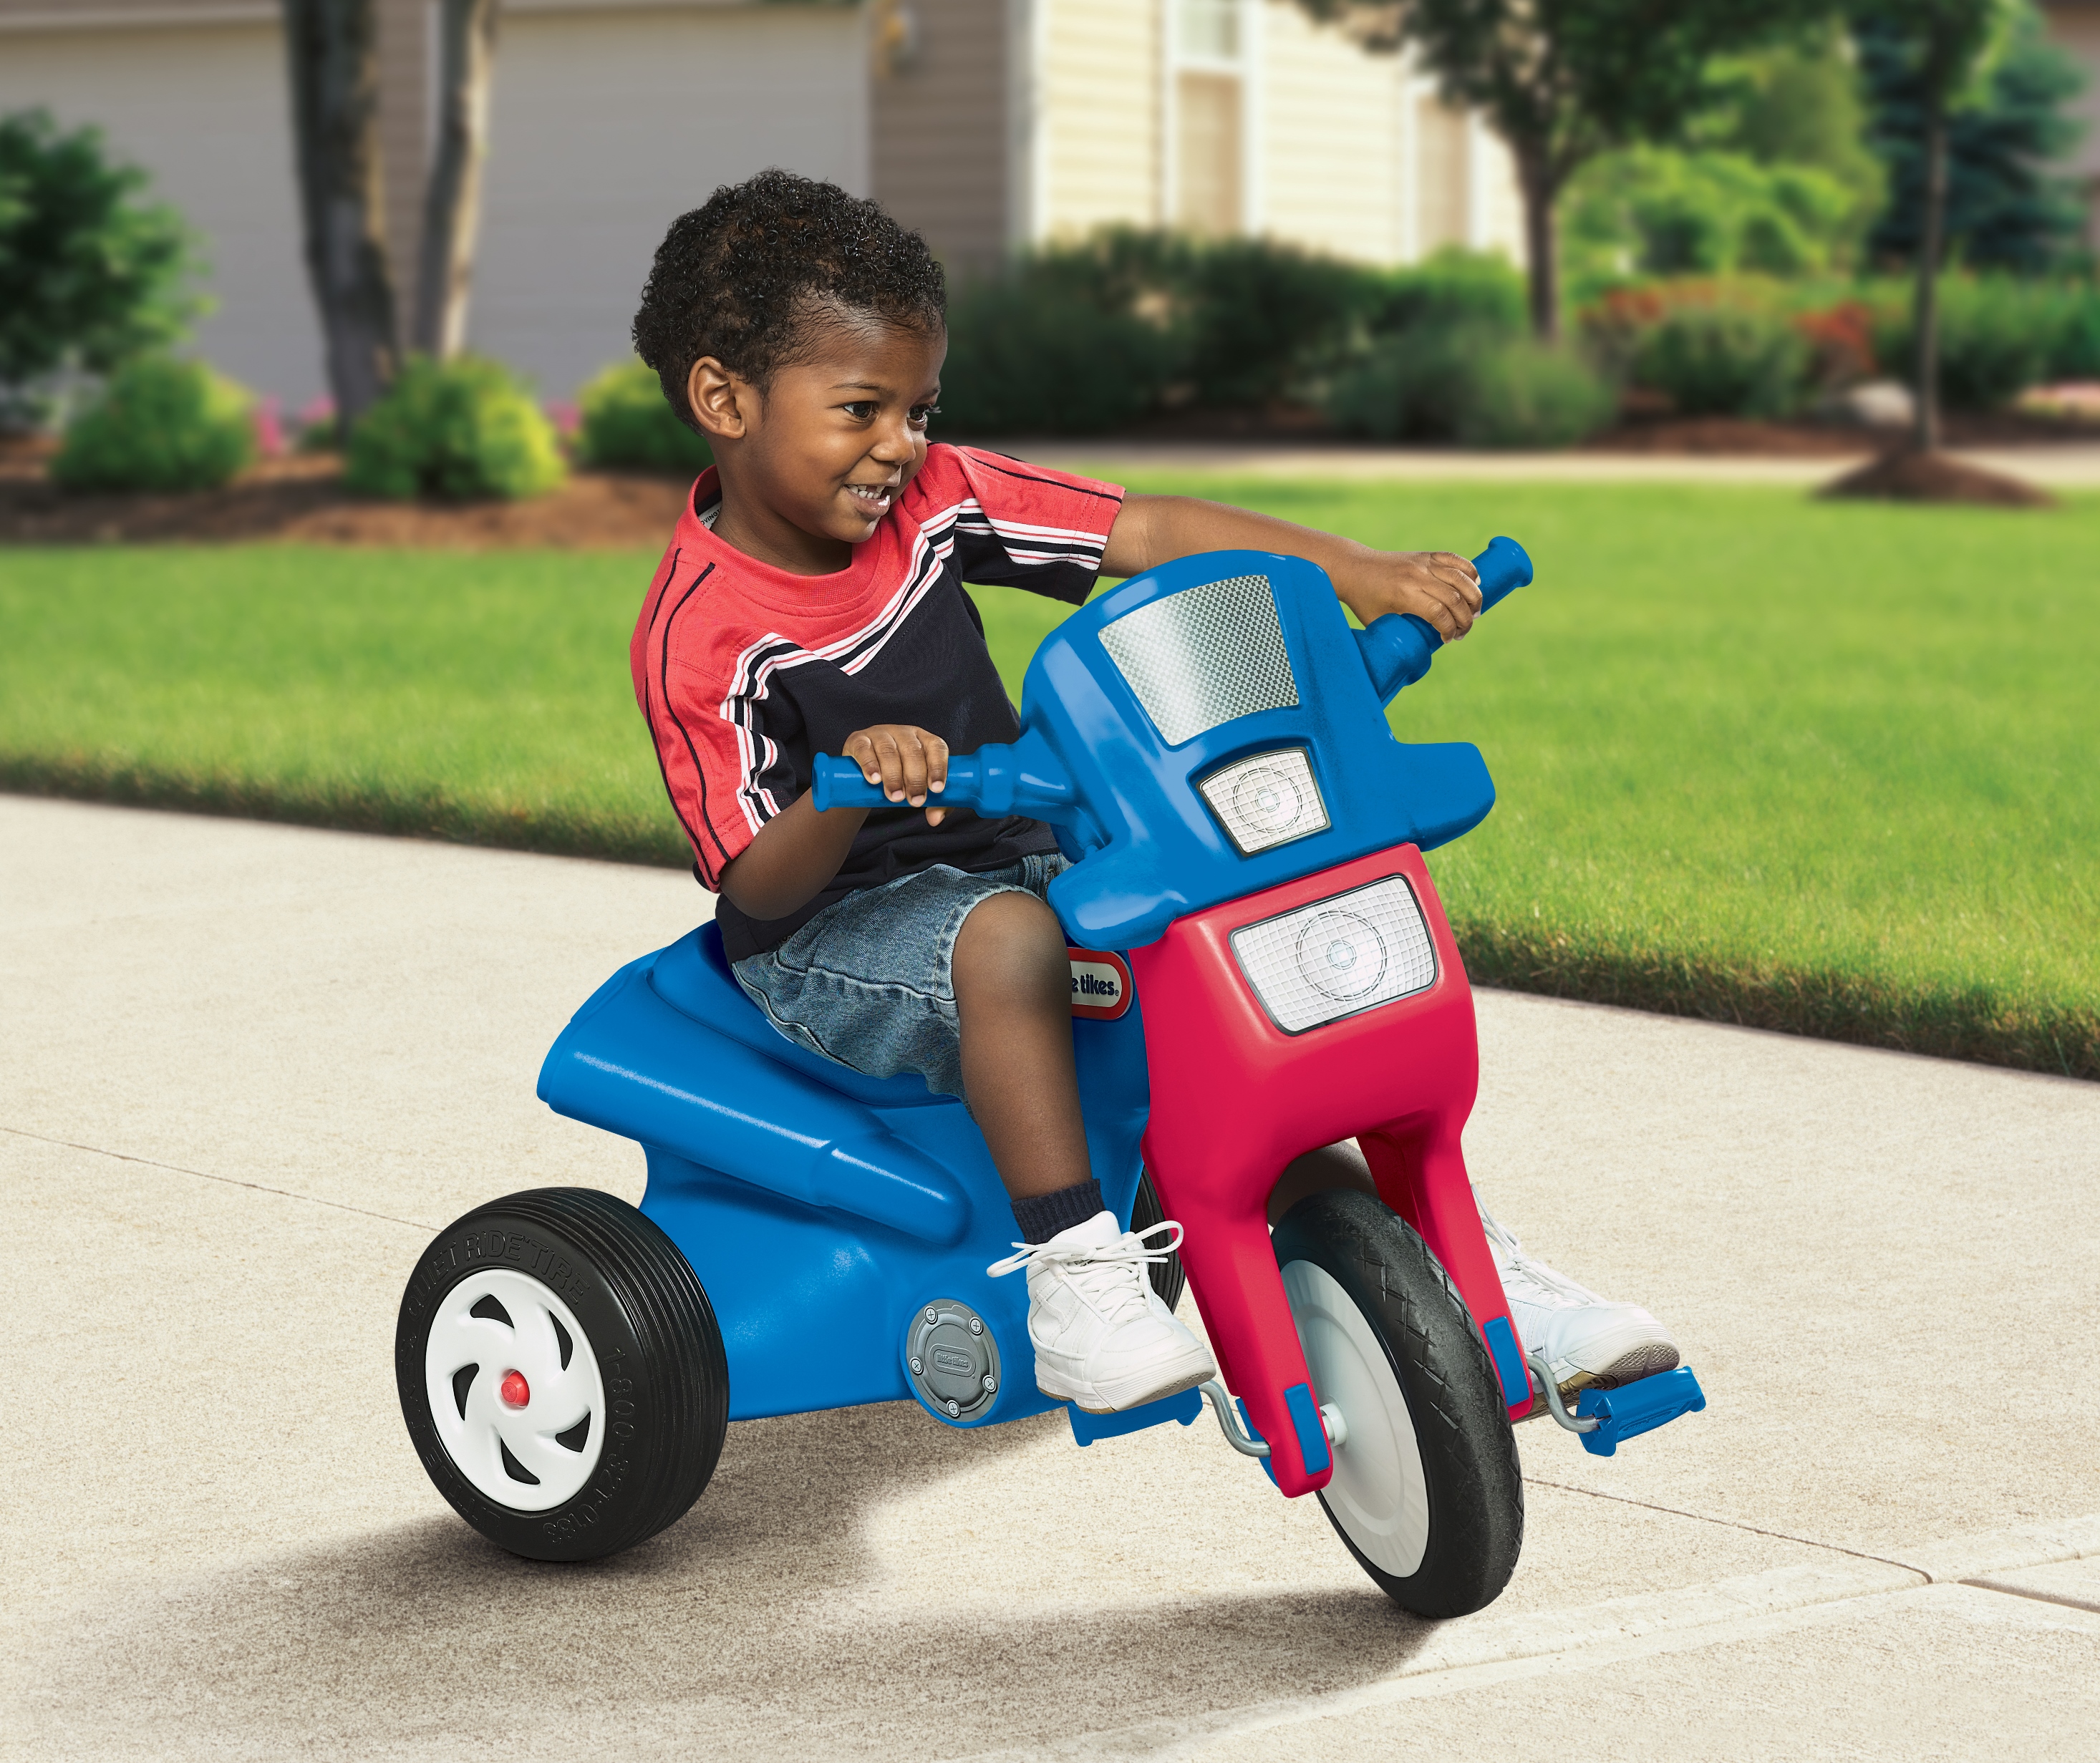 Little Tikes Classic Sport Cycle Pedal Ride On Trike - image 3 of 7